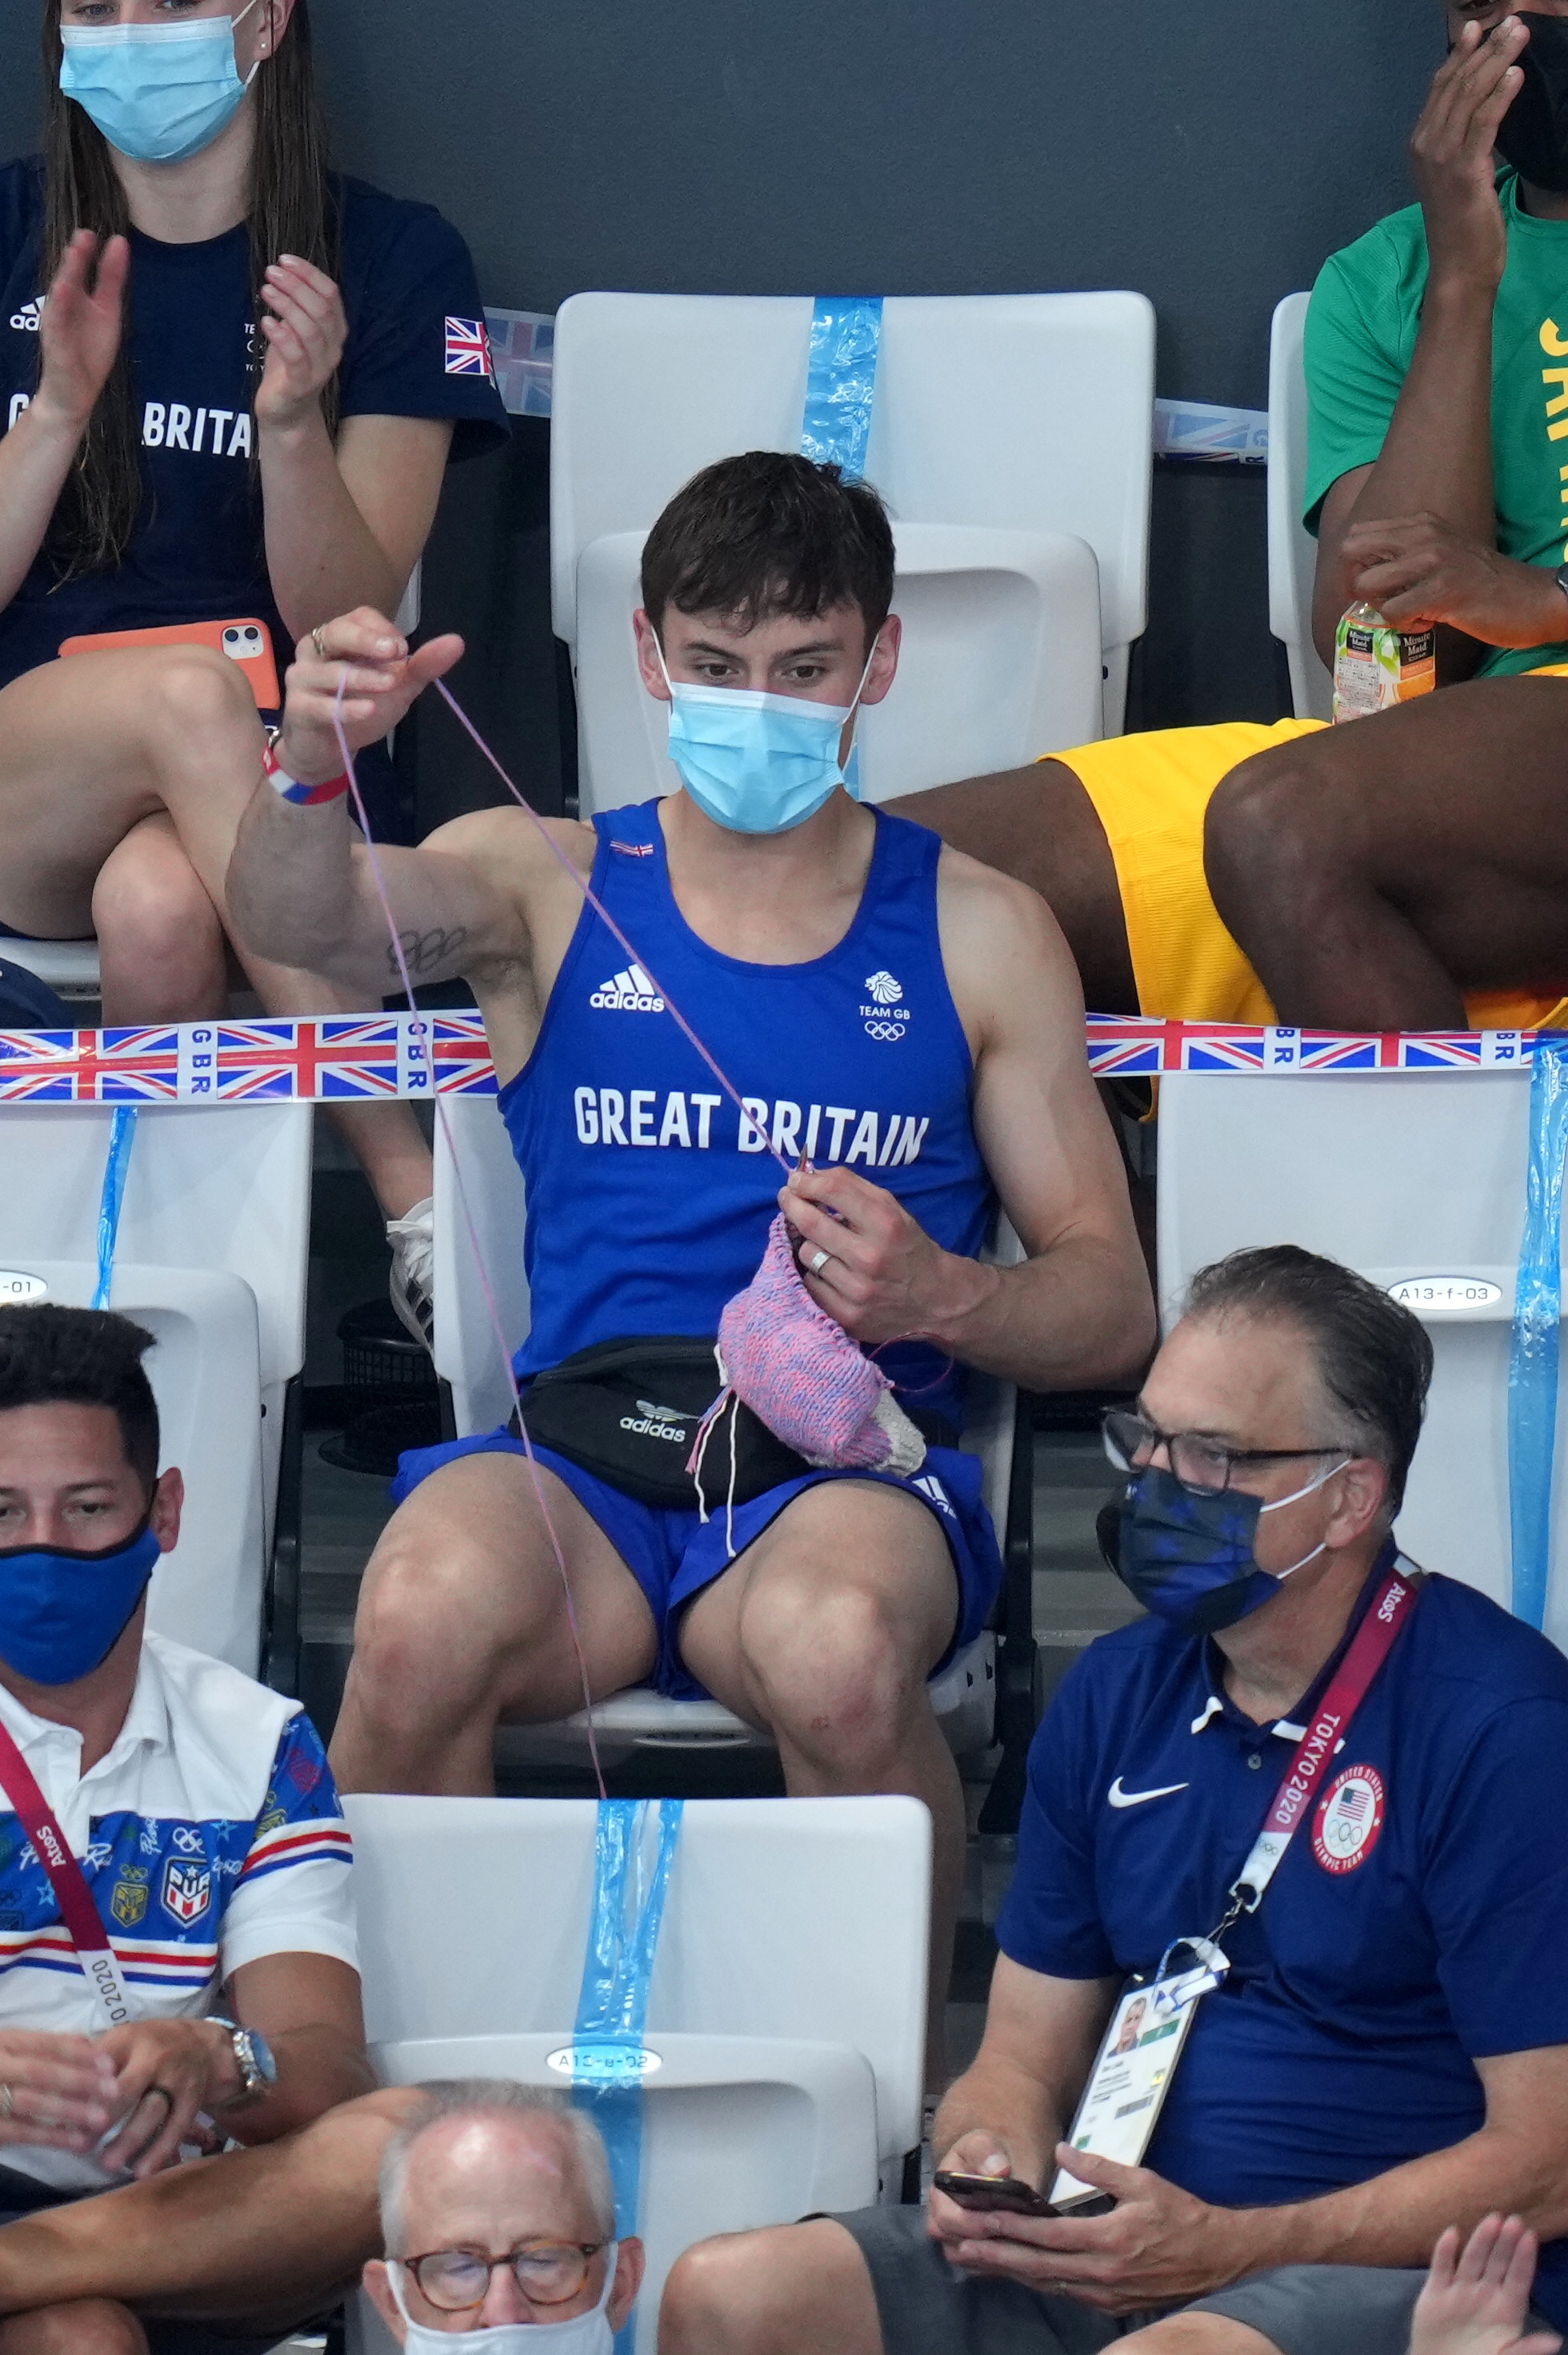 Tom knitting in the stands as he looks at the diving pool